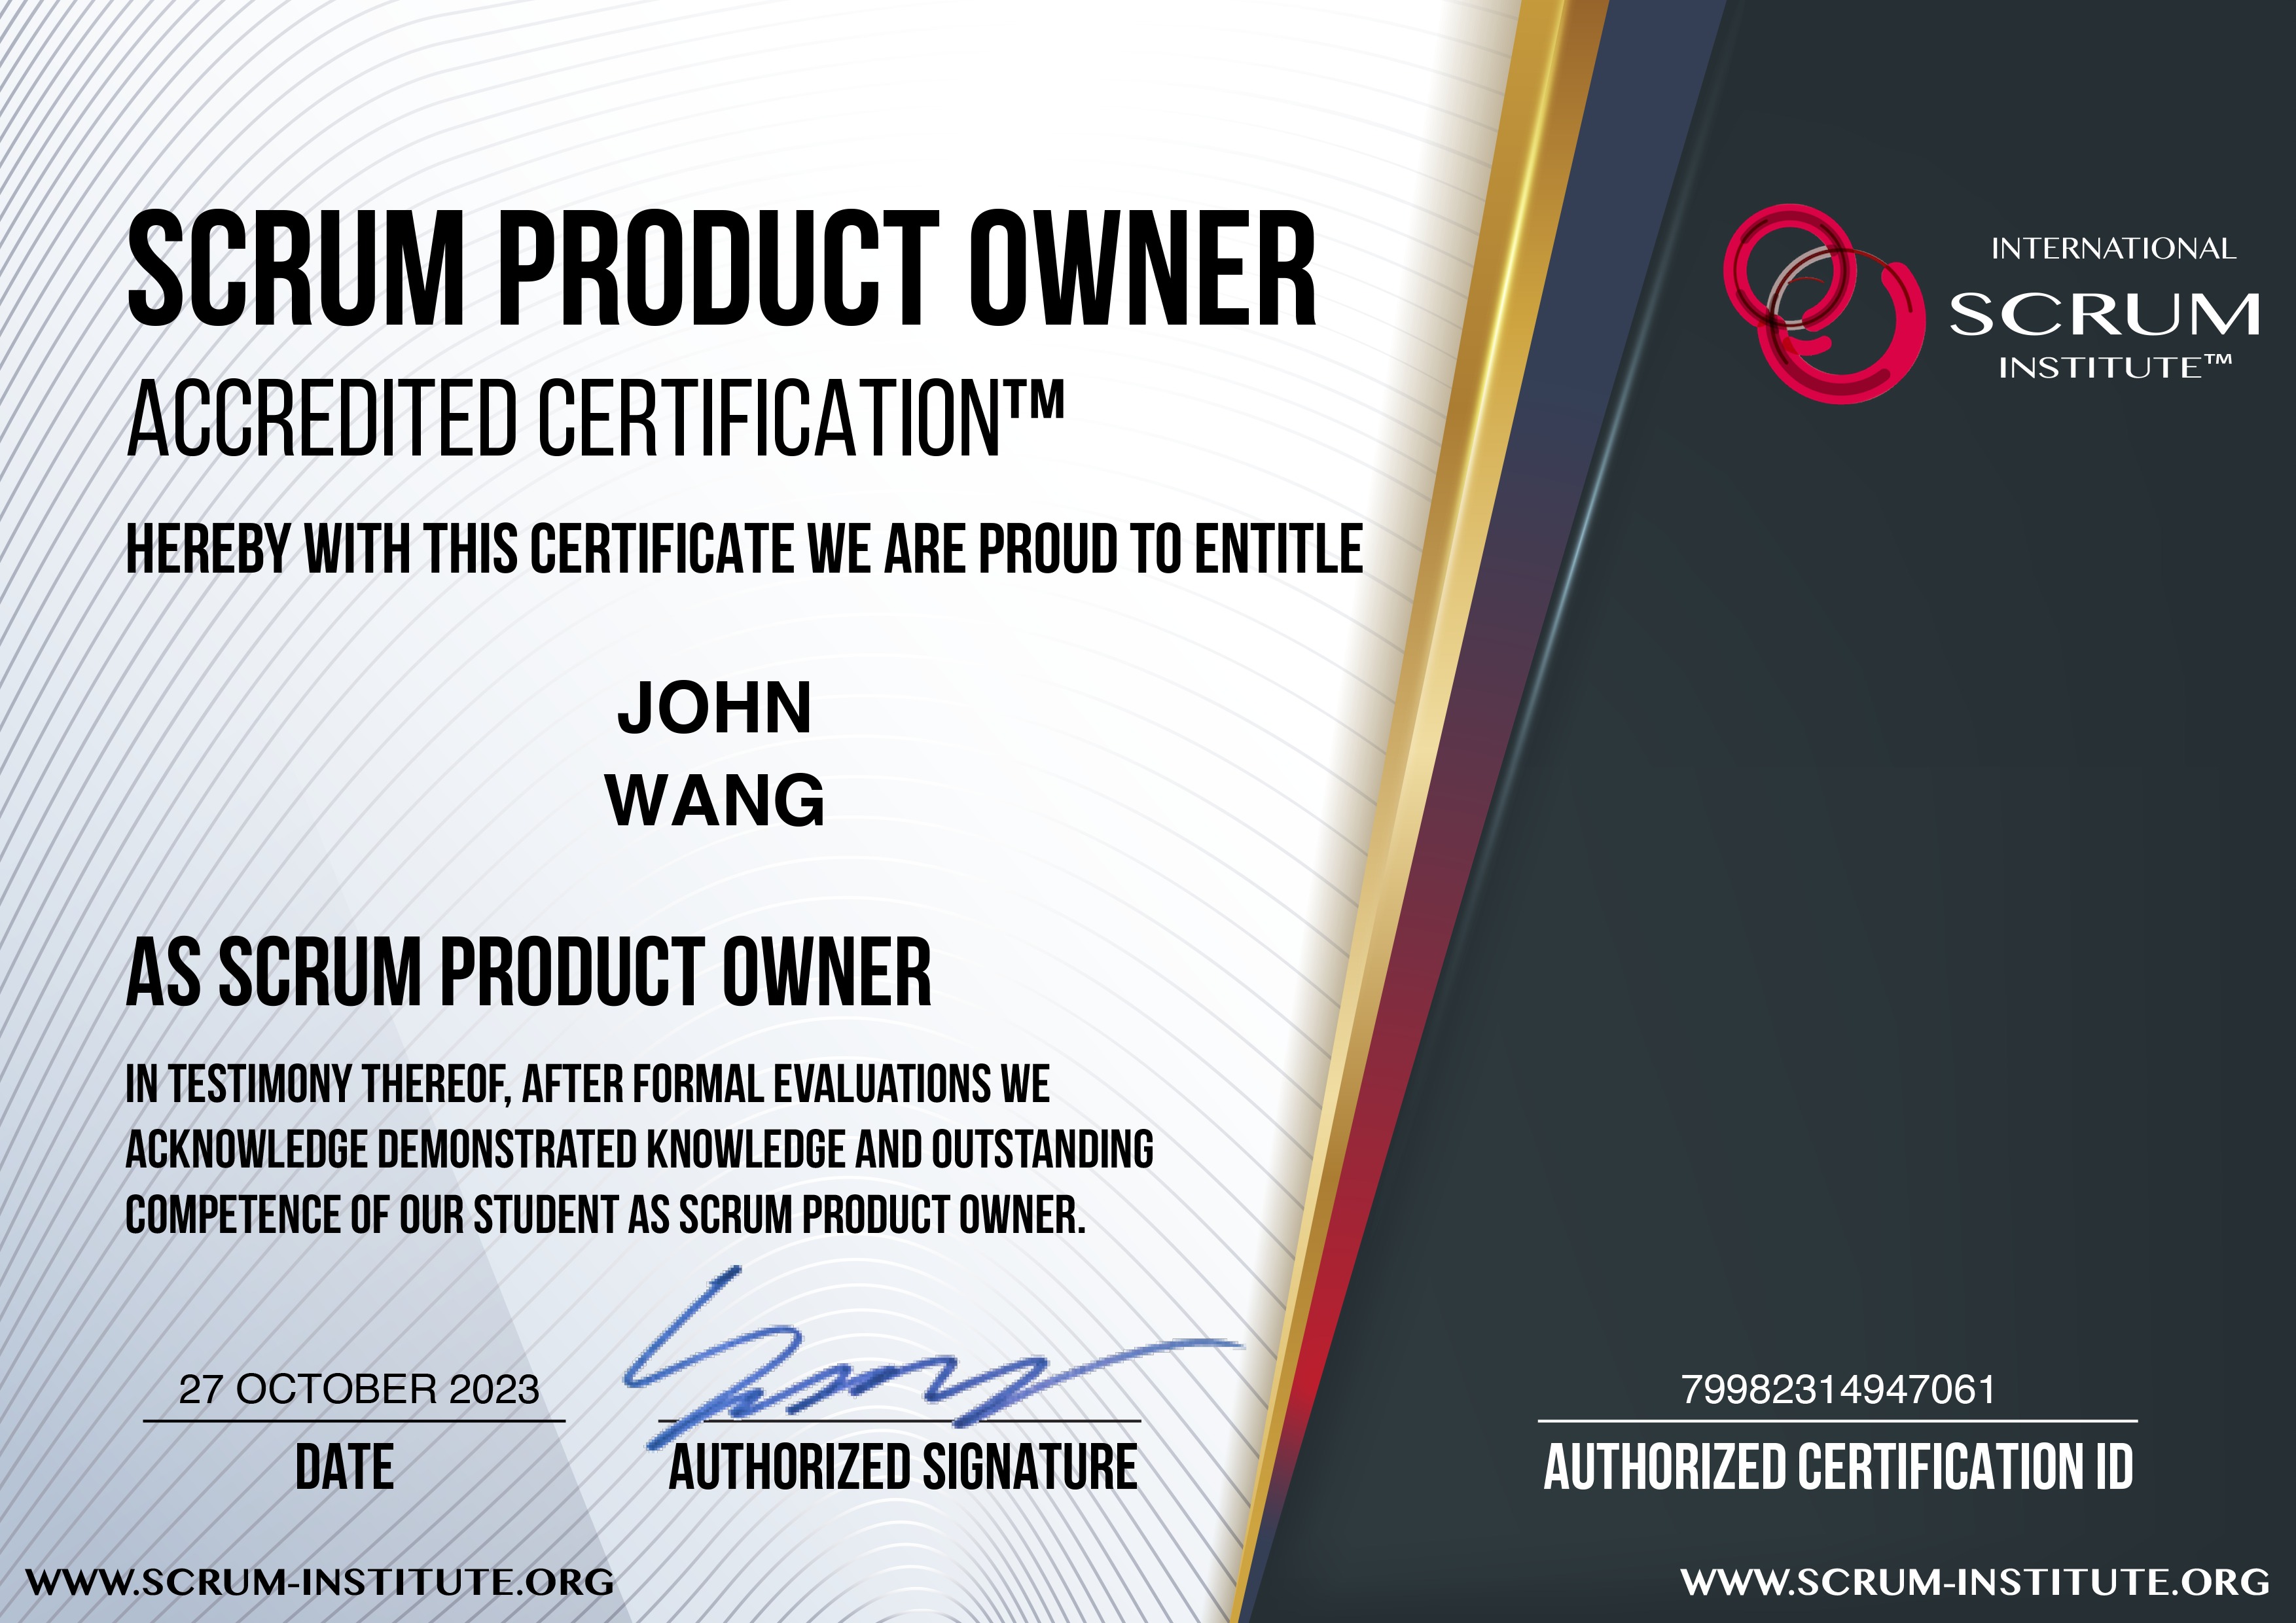 John's Scrum Product Owner Accredited Certification (SPOAC) from Scrum Institute